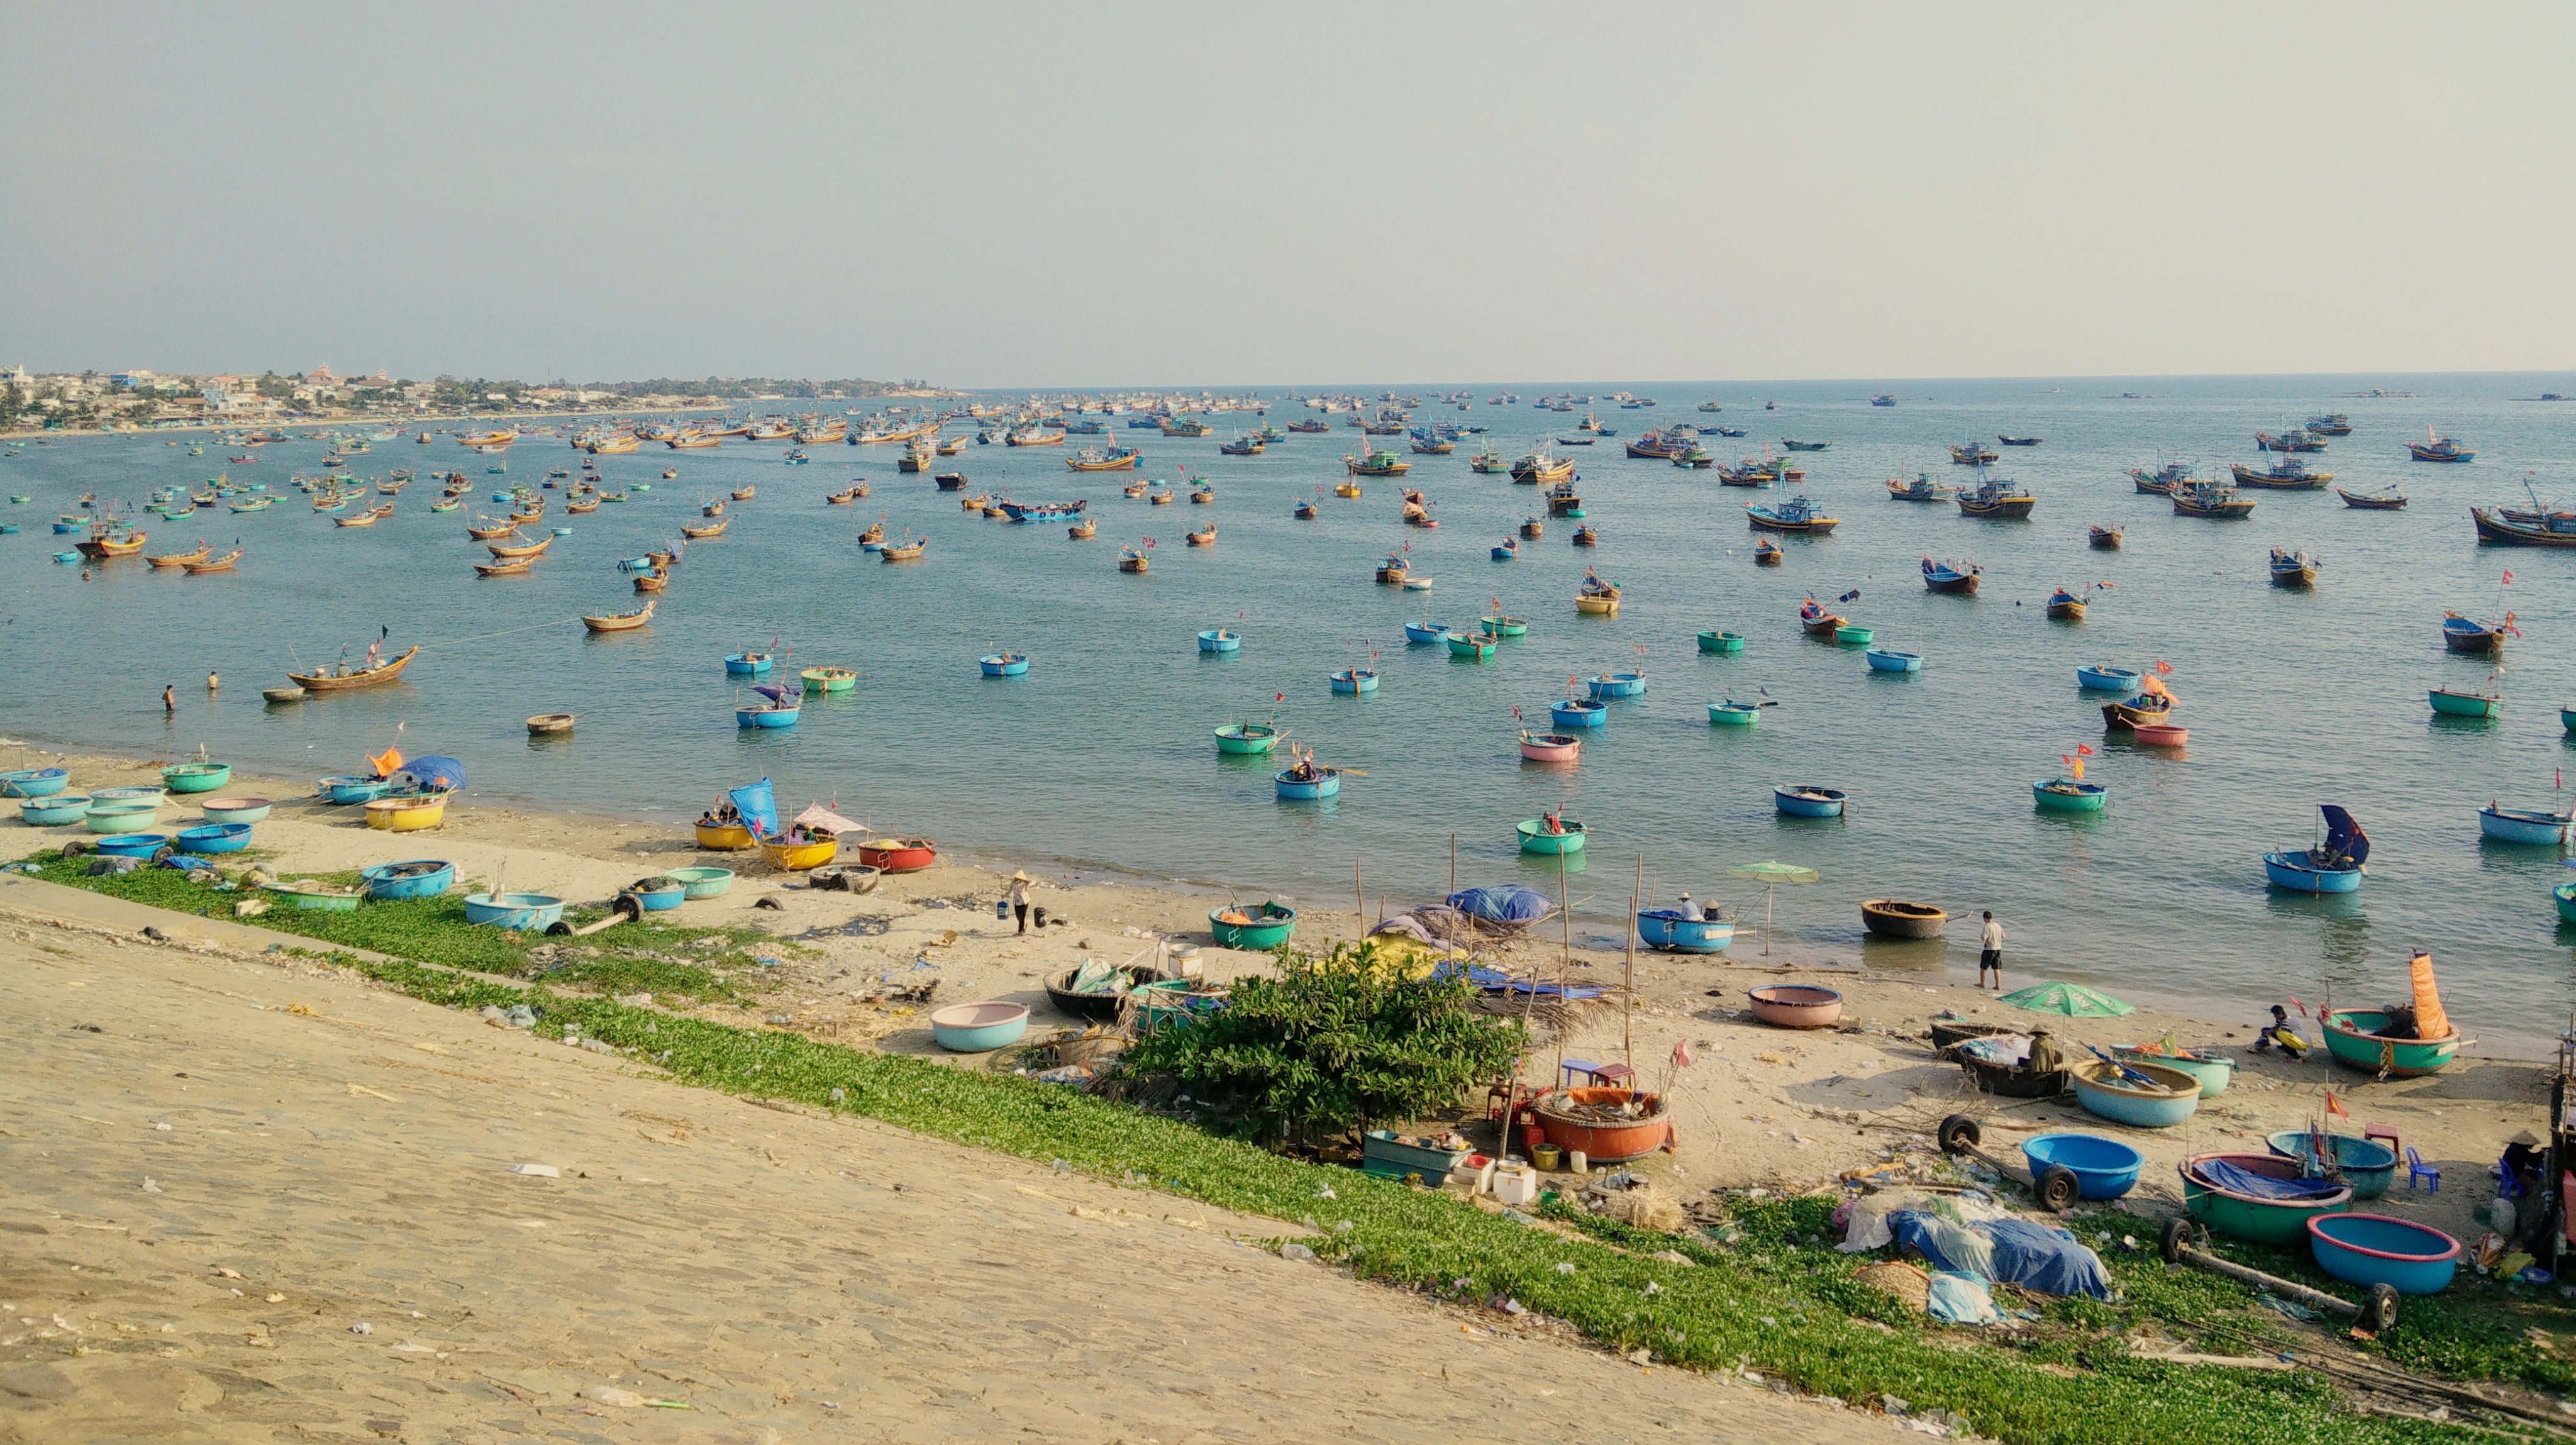 Revised law on allowing foreign lease of ocean surface raises concern in Vietnam